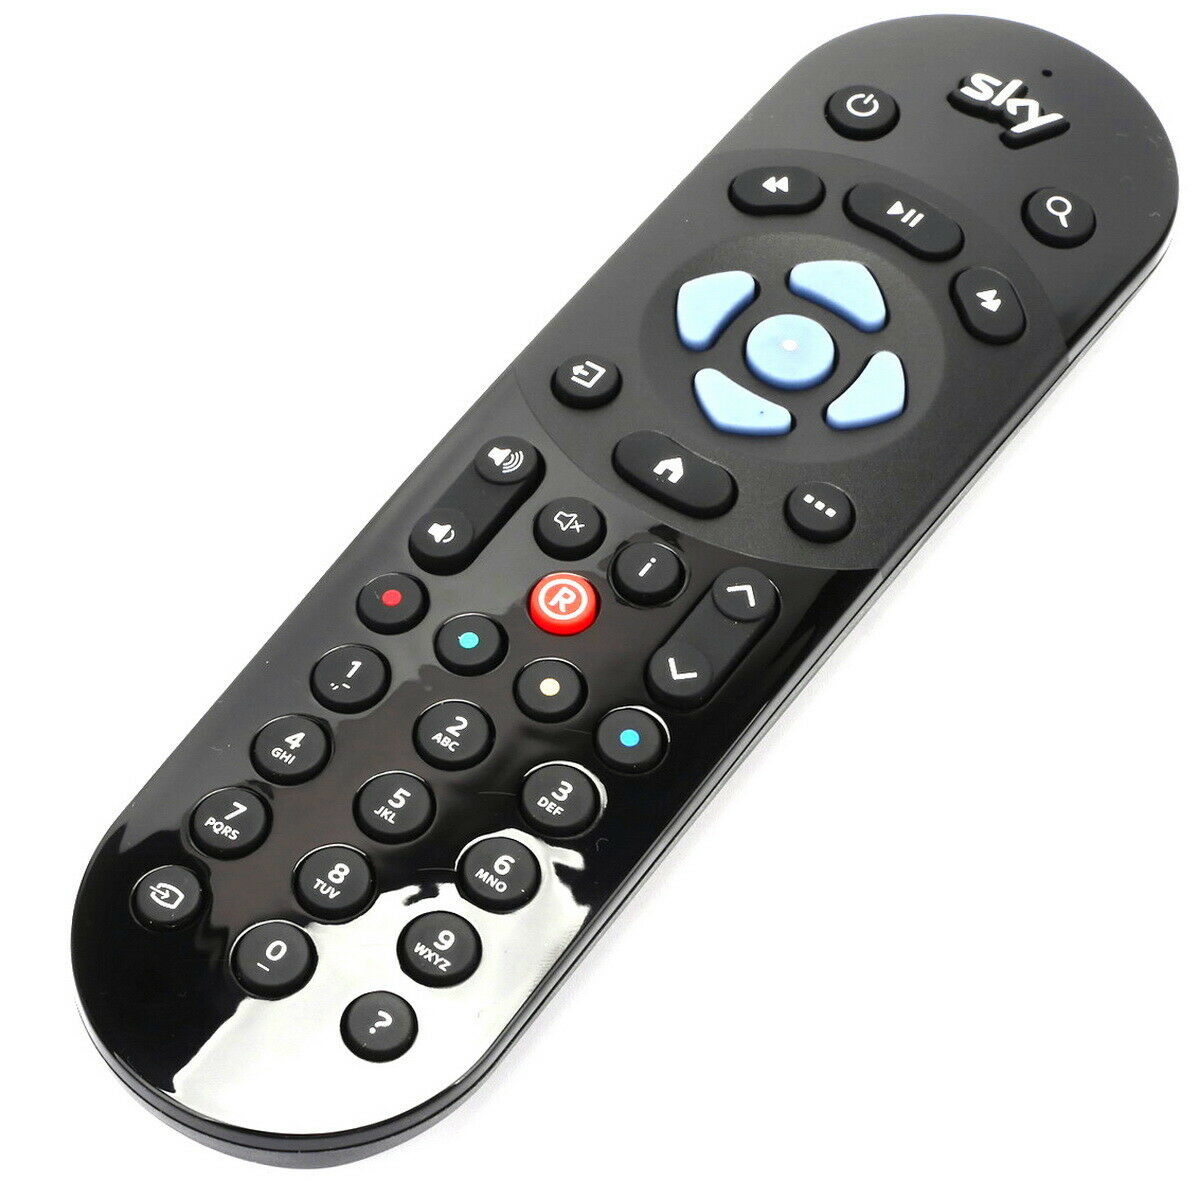 E57065-Universal-Replacement-Infrared-Remote-Control-For-Sky-Q-Version-2-TV-Box-1671331-6